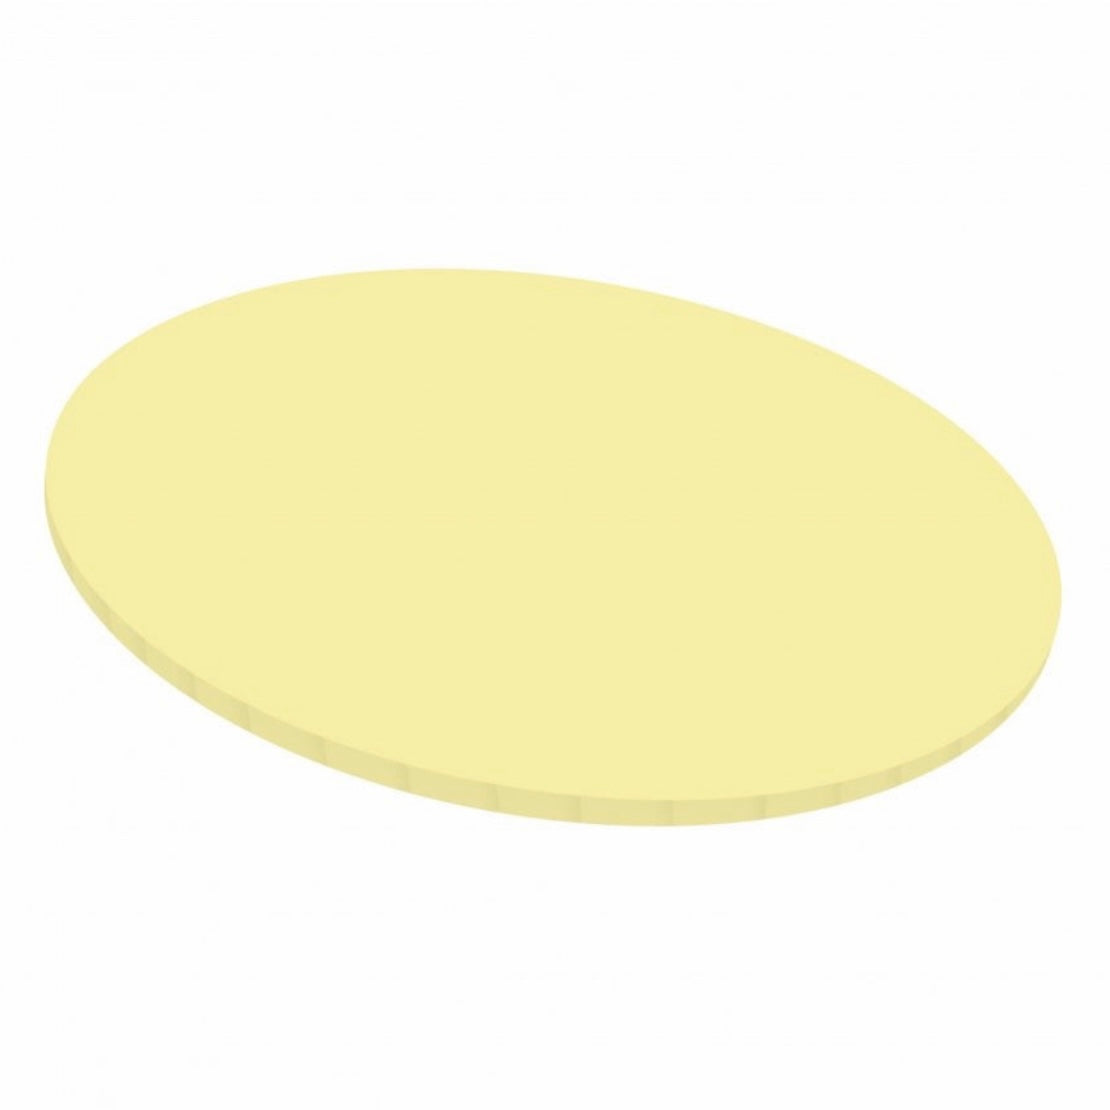 BENTO CAKE BOARDS - PASTEL YELLOW - 6 INCH - PACK OF 5